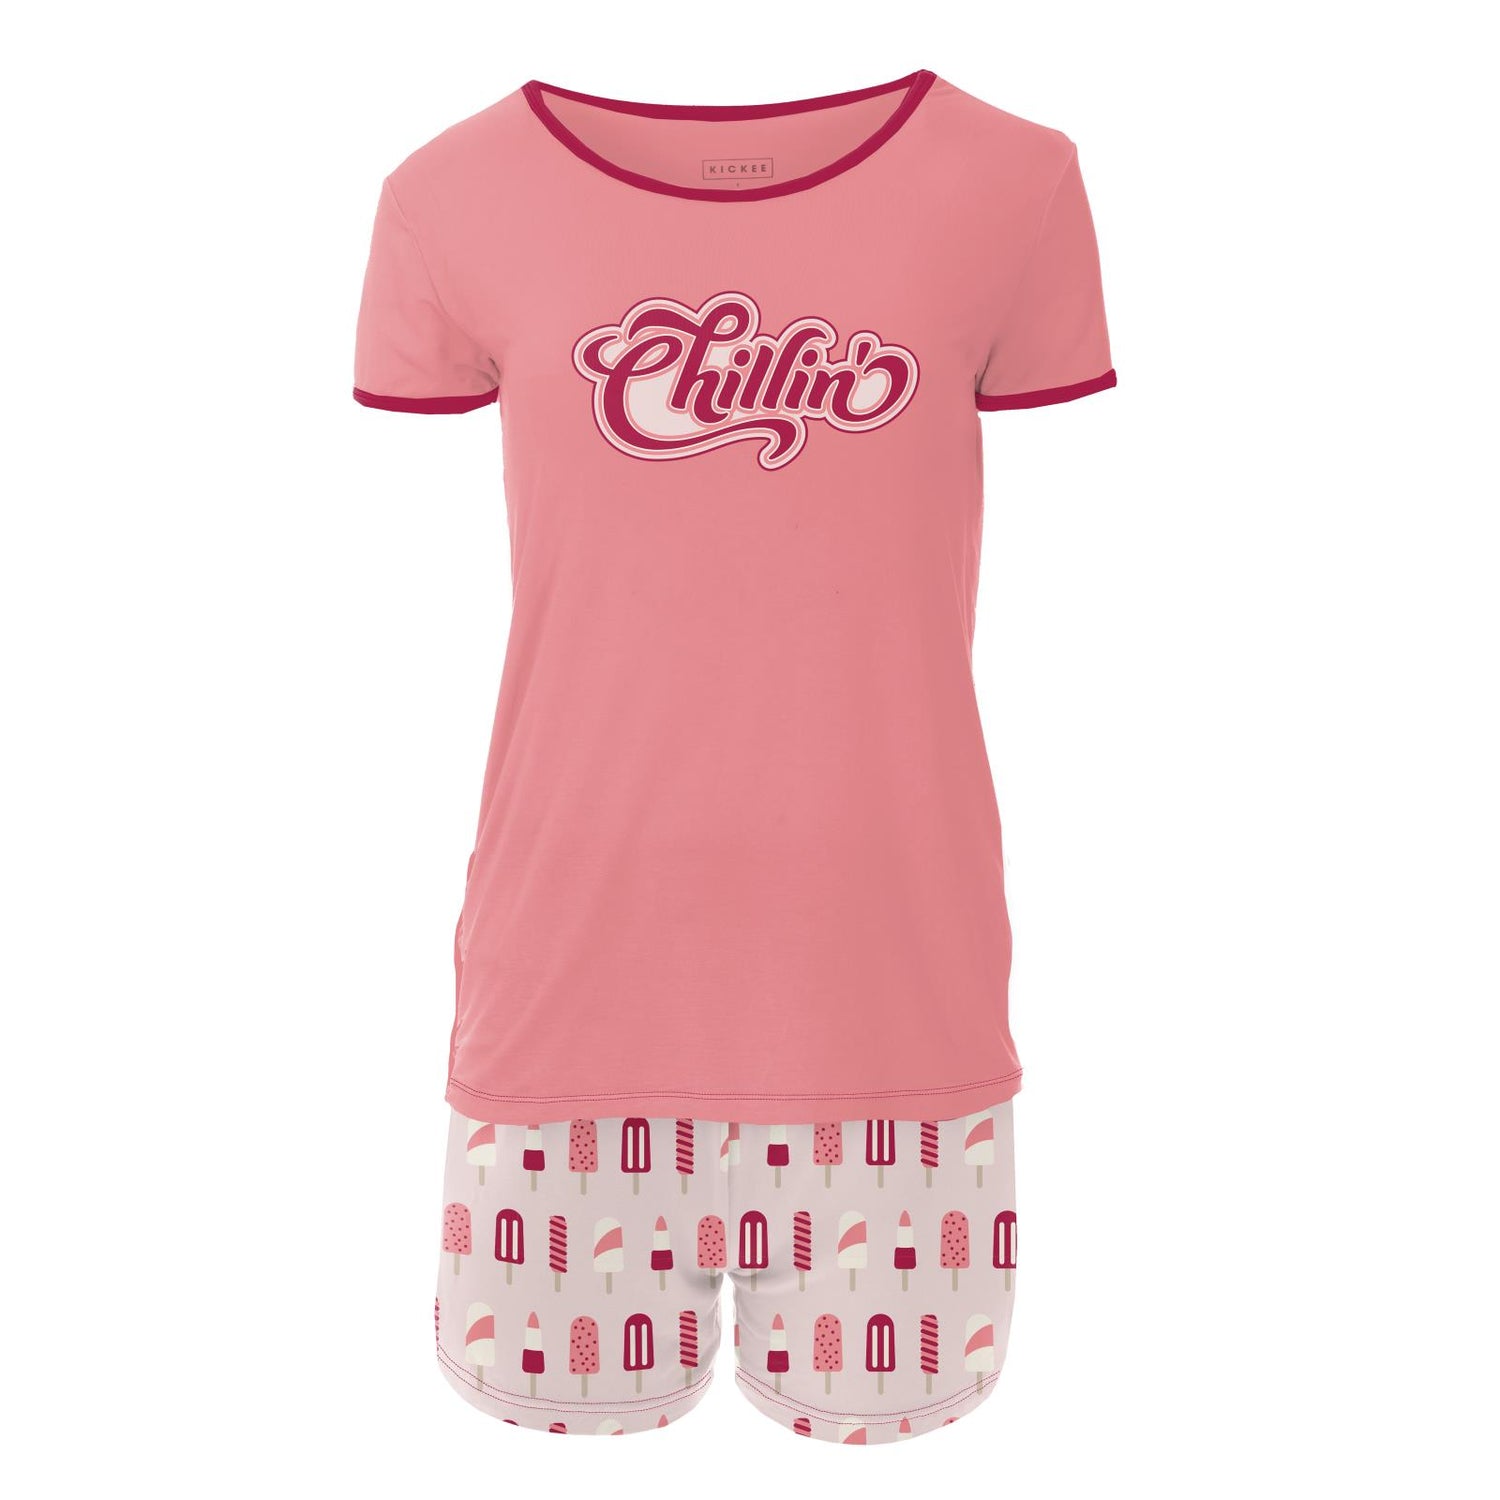 Women's Short Sleeve Graphic Tee Fitted Pajama Set with Shorts in Macaroon Popsicles